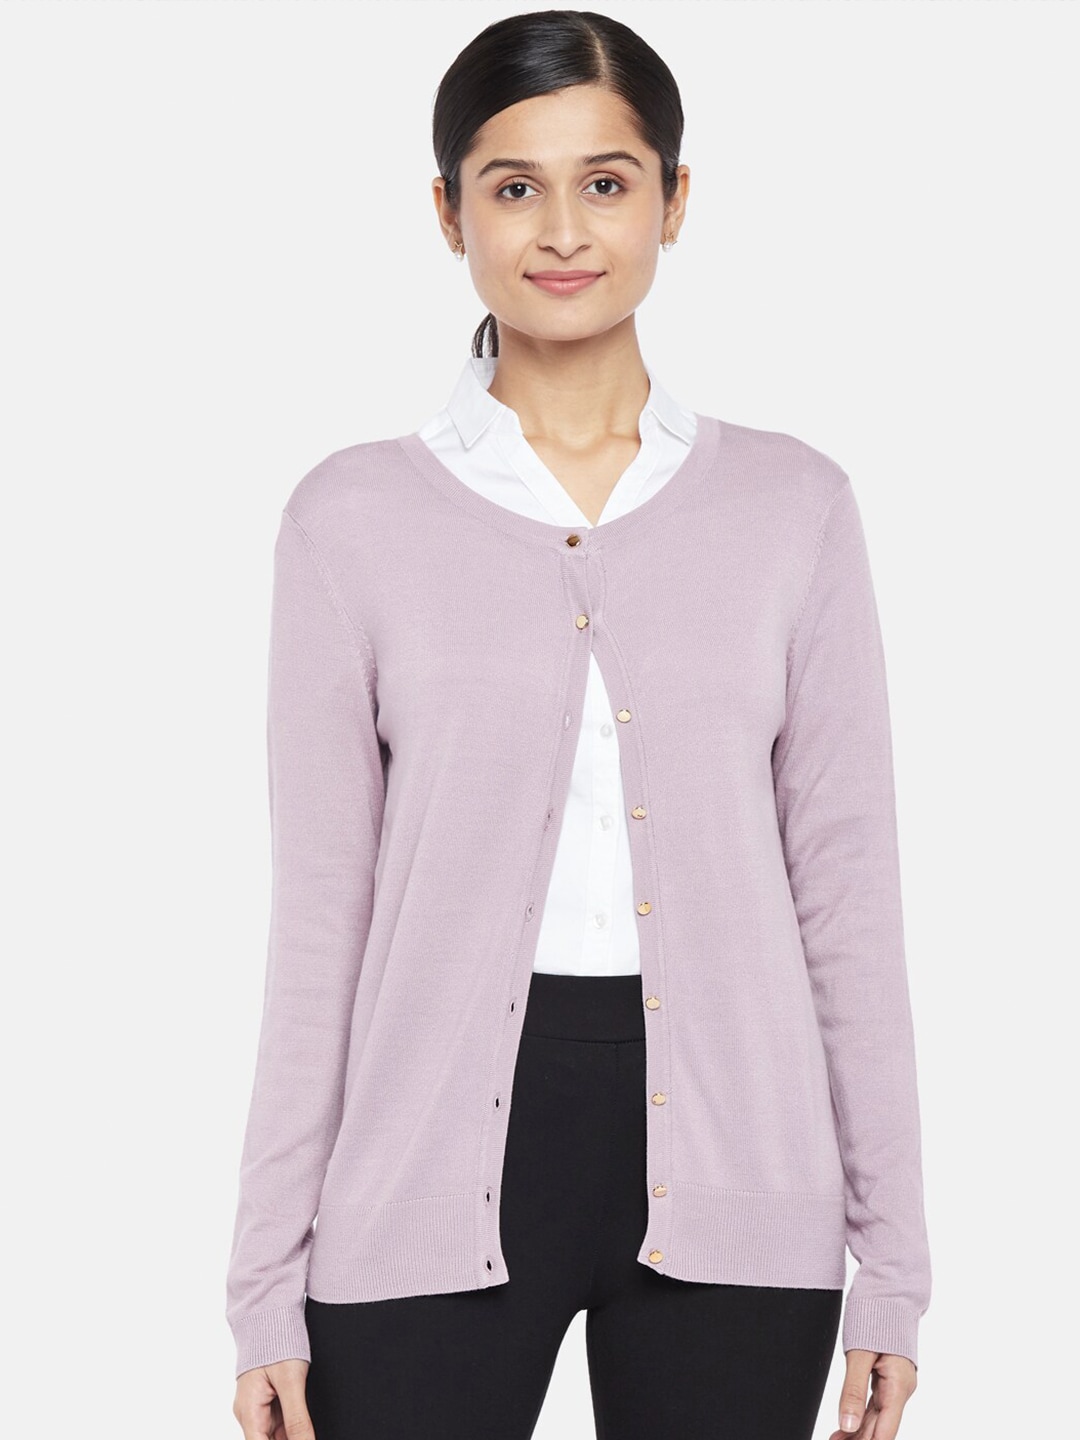 Annabelle by Pantaloons Women Lavender Cardigan Price in India